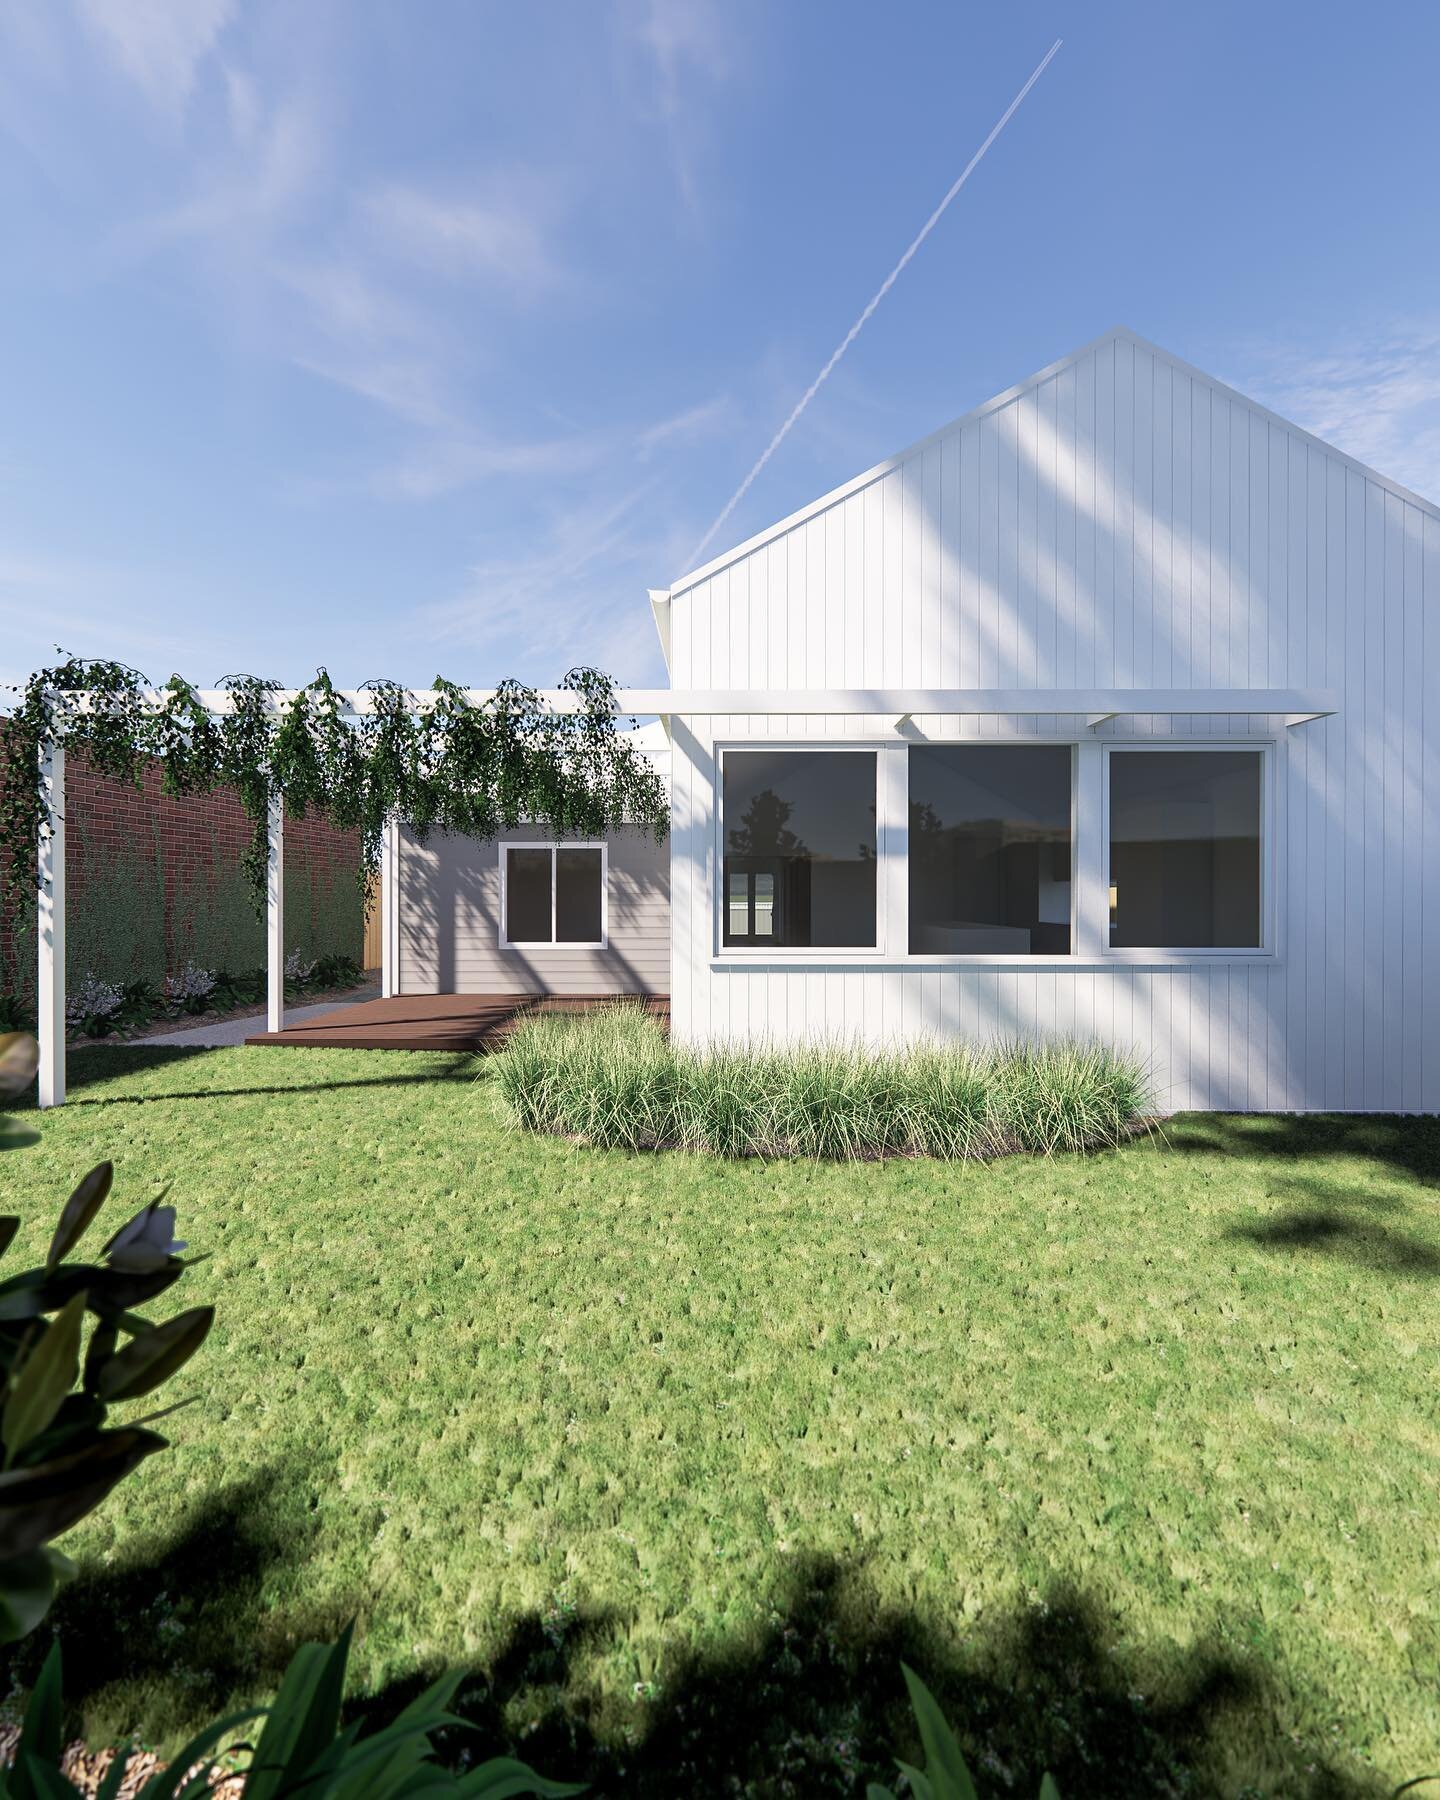 Wanalta House

Currently in concept design the Wanalta House is a contemporary addition and alterations to an interwar bungalow. The original portion of the home will undergo some alterations, repair and restoration work to bring it back to life. Whi